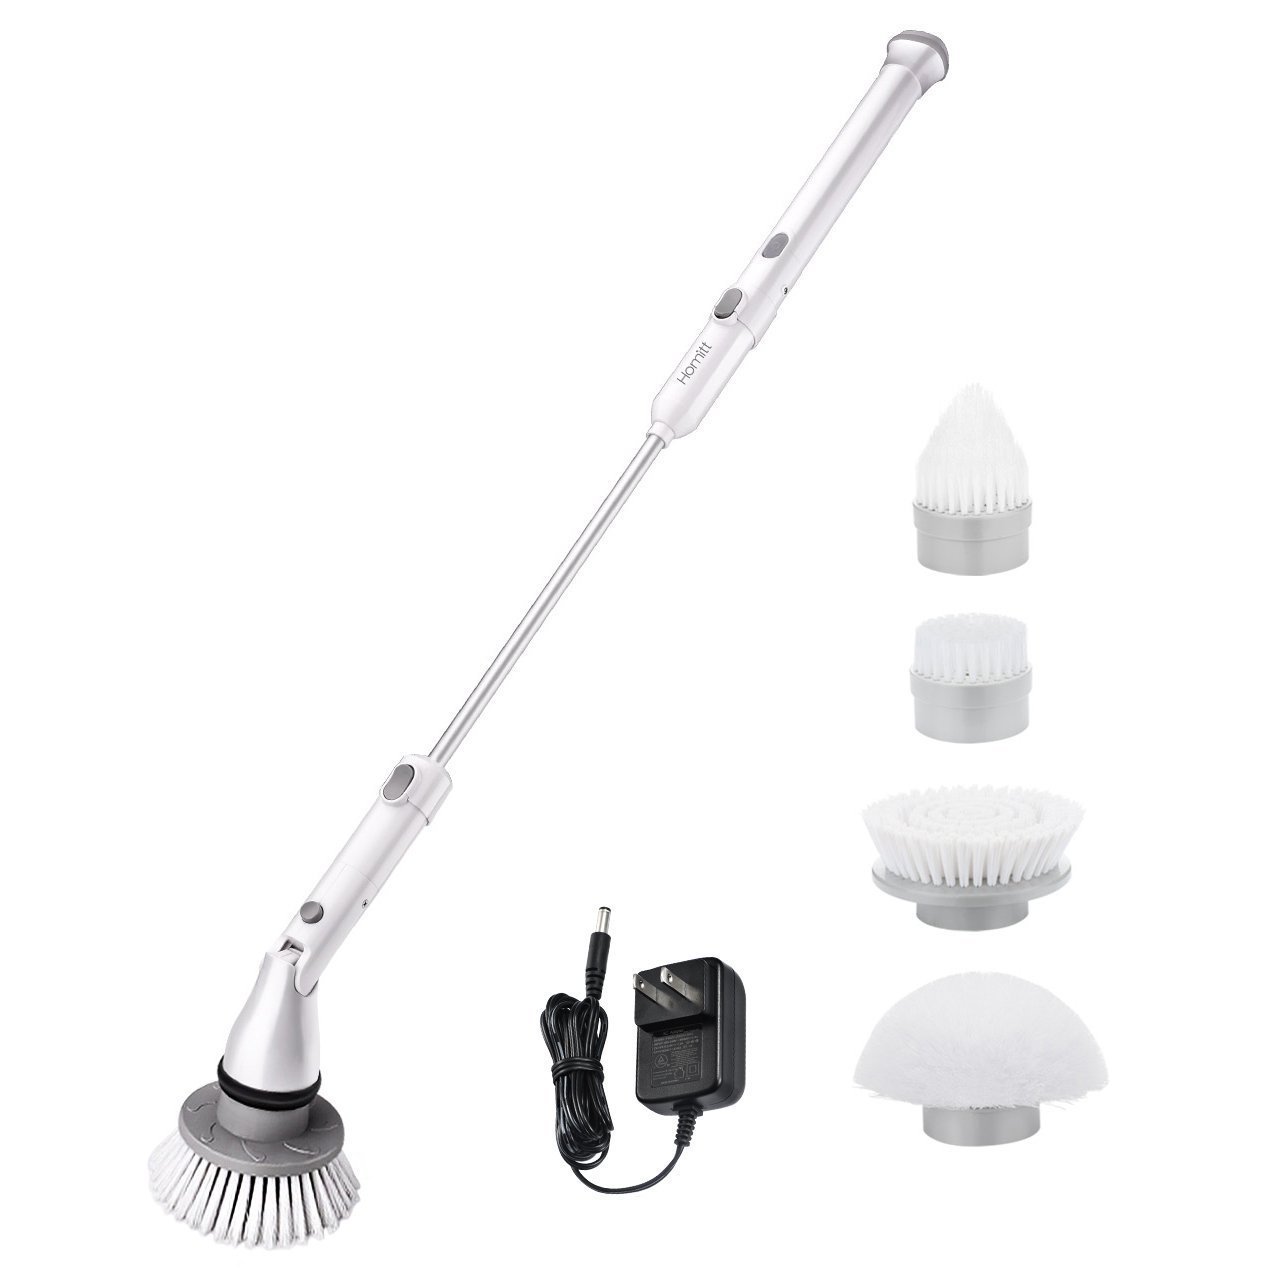 HOMITT Cordless Power Scrubber Electric with 3 Cleaning Brush Heads